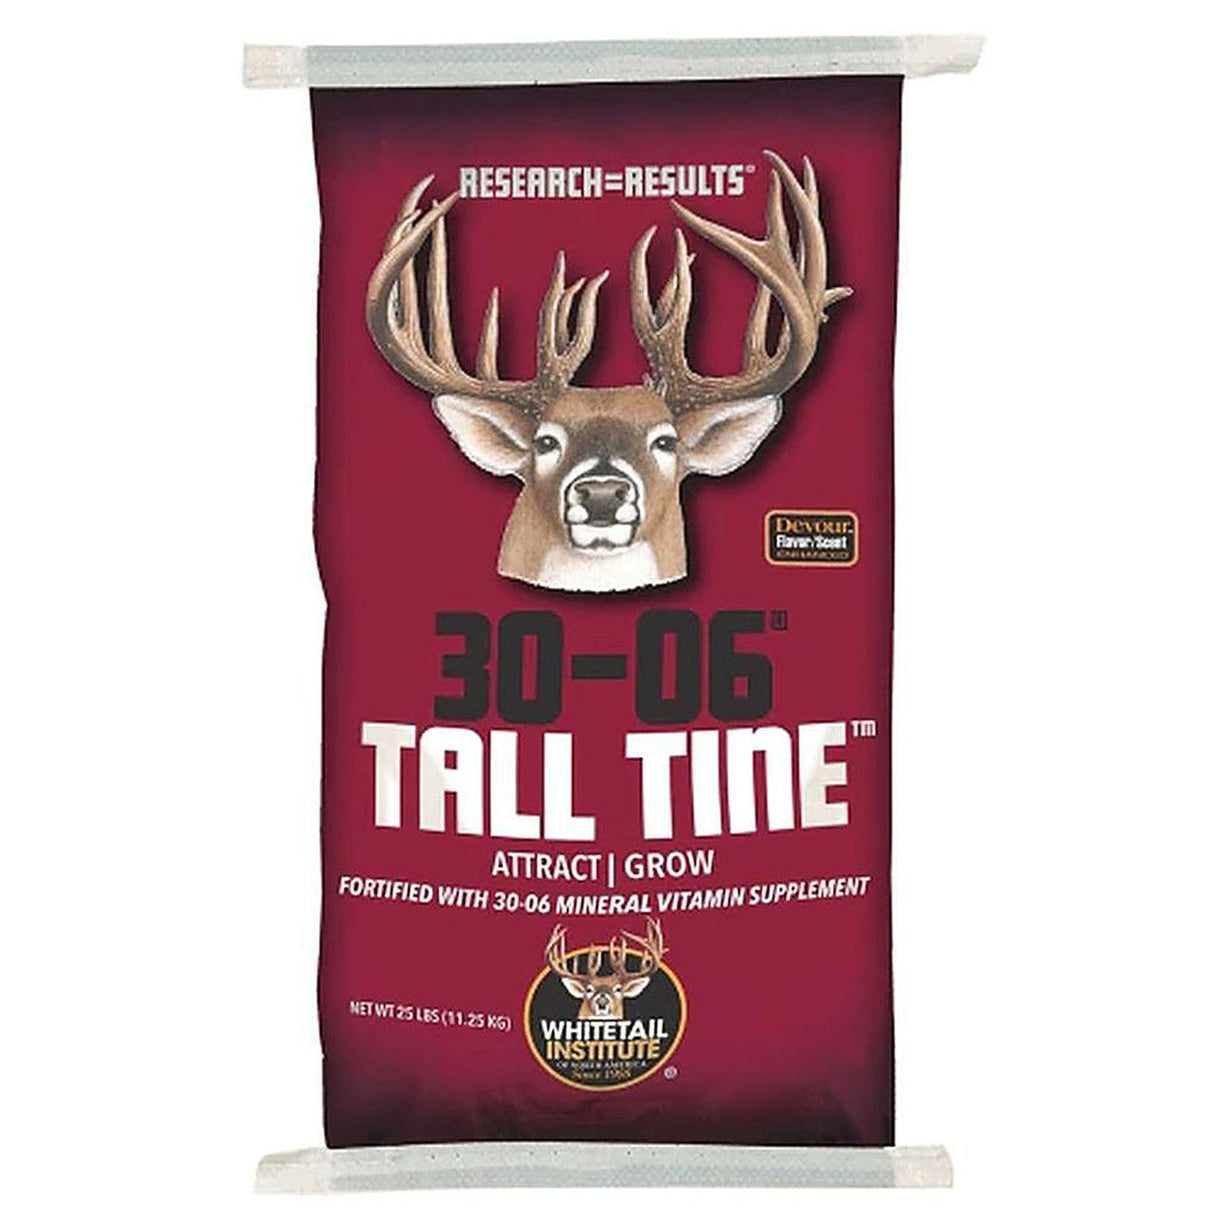 Whitetail Institute 30-06 Tall Tine 25lb